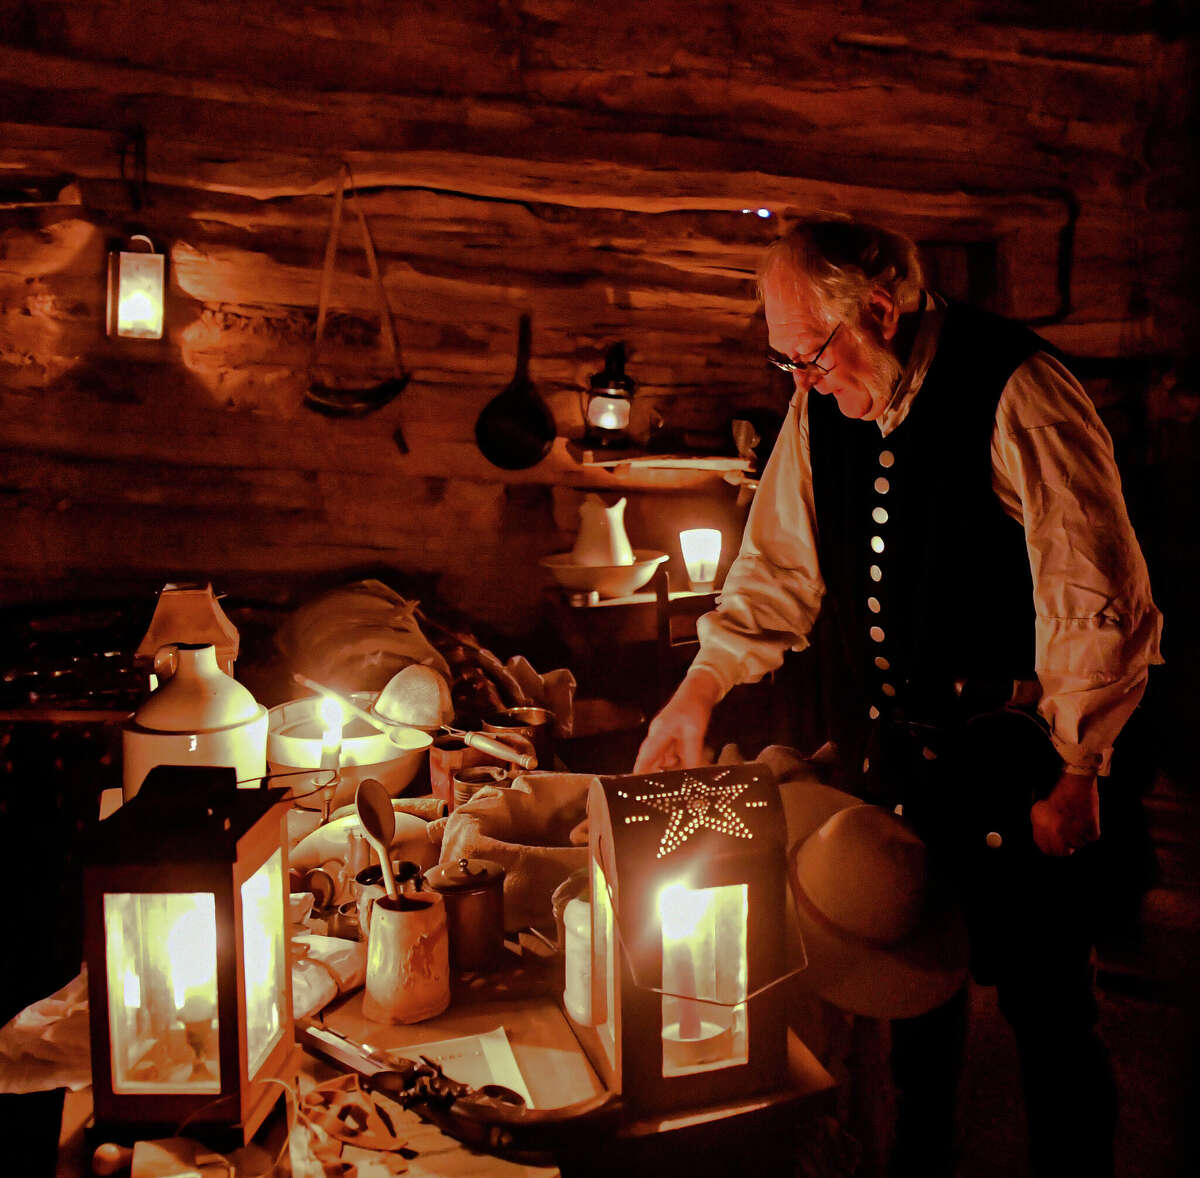 Volunteer Lewis Neely demonstrated the preparation process for a traditional Christmas dinner in the 1838 El Capote Cabin at the National Ranching Heritage Center during Candlelight at the Ranch. (Photo by John Weast)